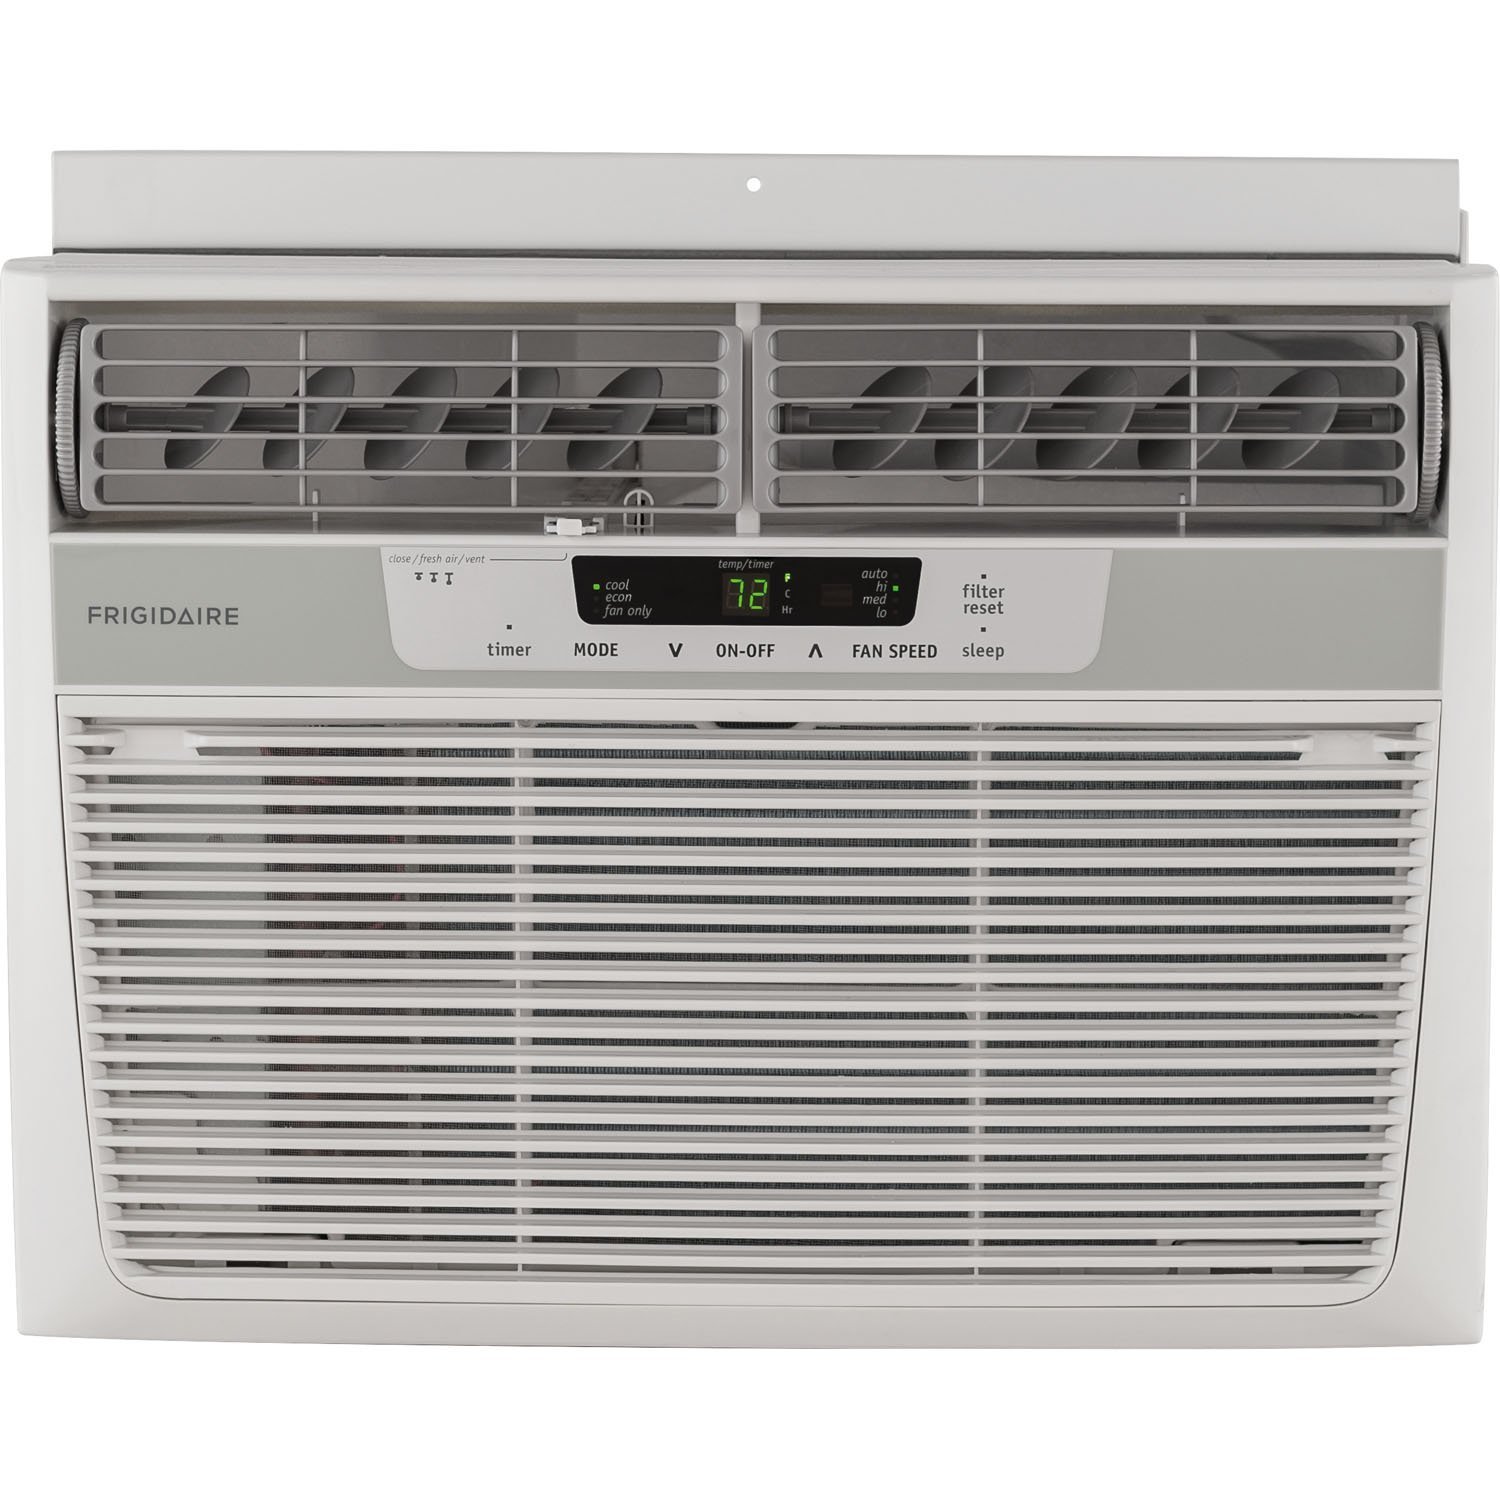 Frigidaire FFRA1022R1 10000 BTU 115-volt Window-Mounted Compact Air Conditioner with Remote Control